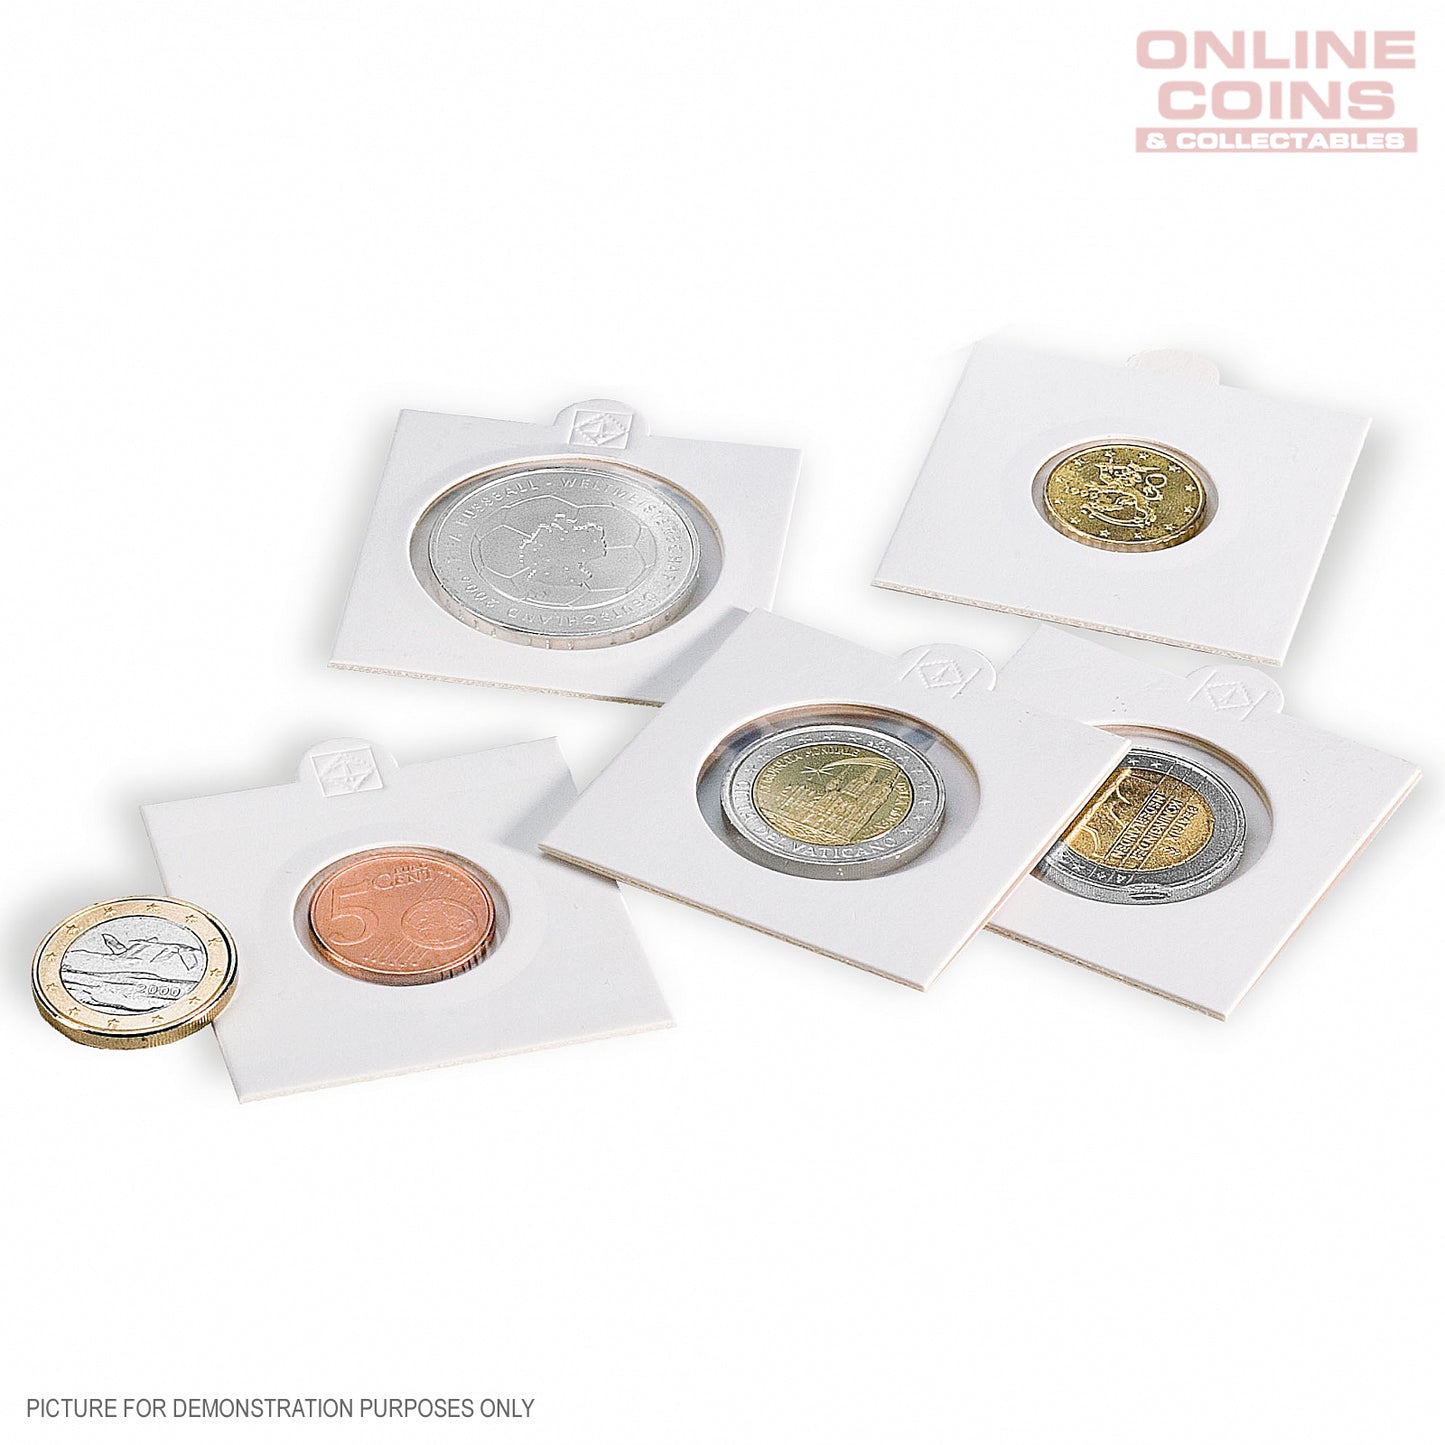 Lighthouse MATRIX WHITE 25mm Self Adhesive 2"x2" Coin Holders x 25 - Protection for your Coins (Suitable For Australian 10c Coins And Shillings)